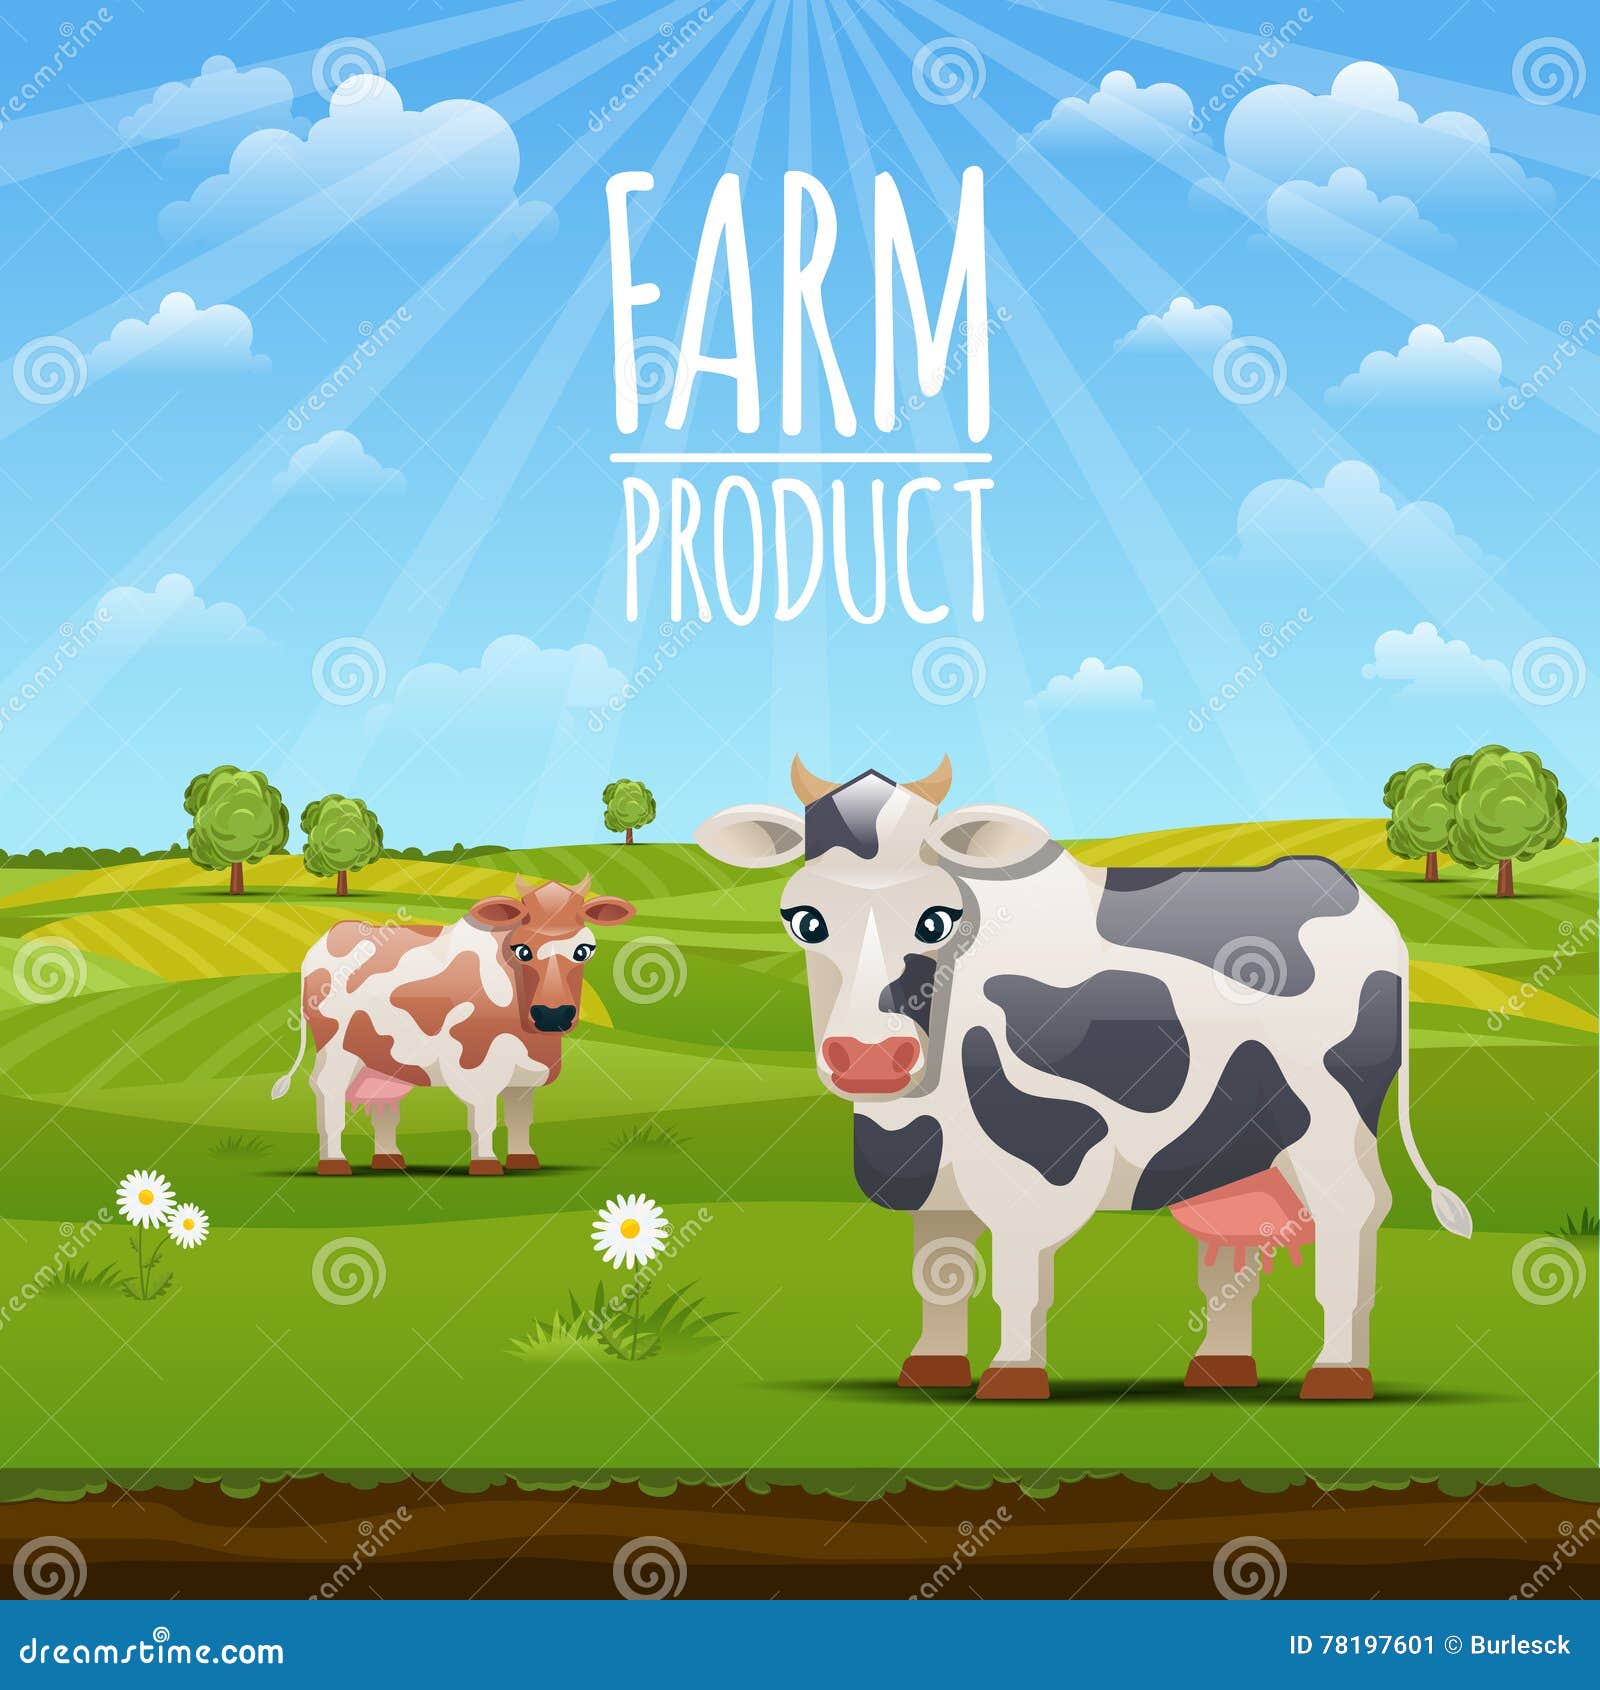 Farm Landscape with Cows Vector Illustration Stock Vector ...